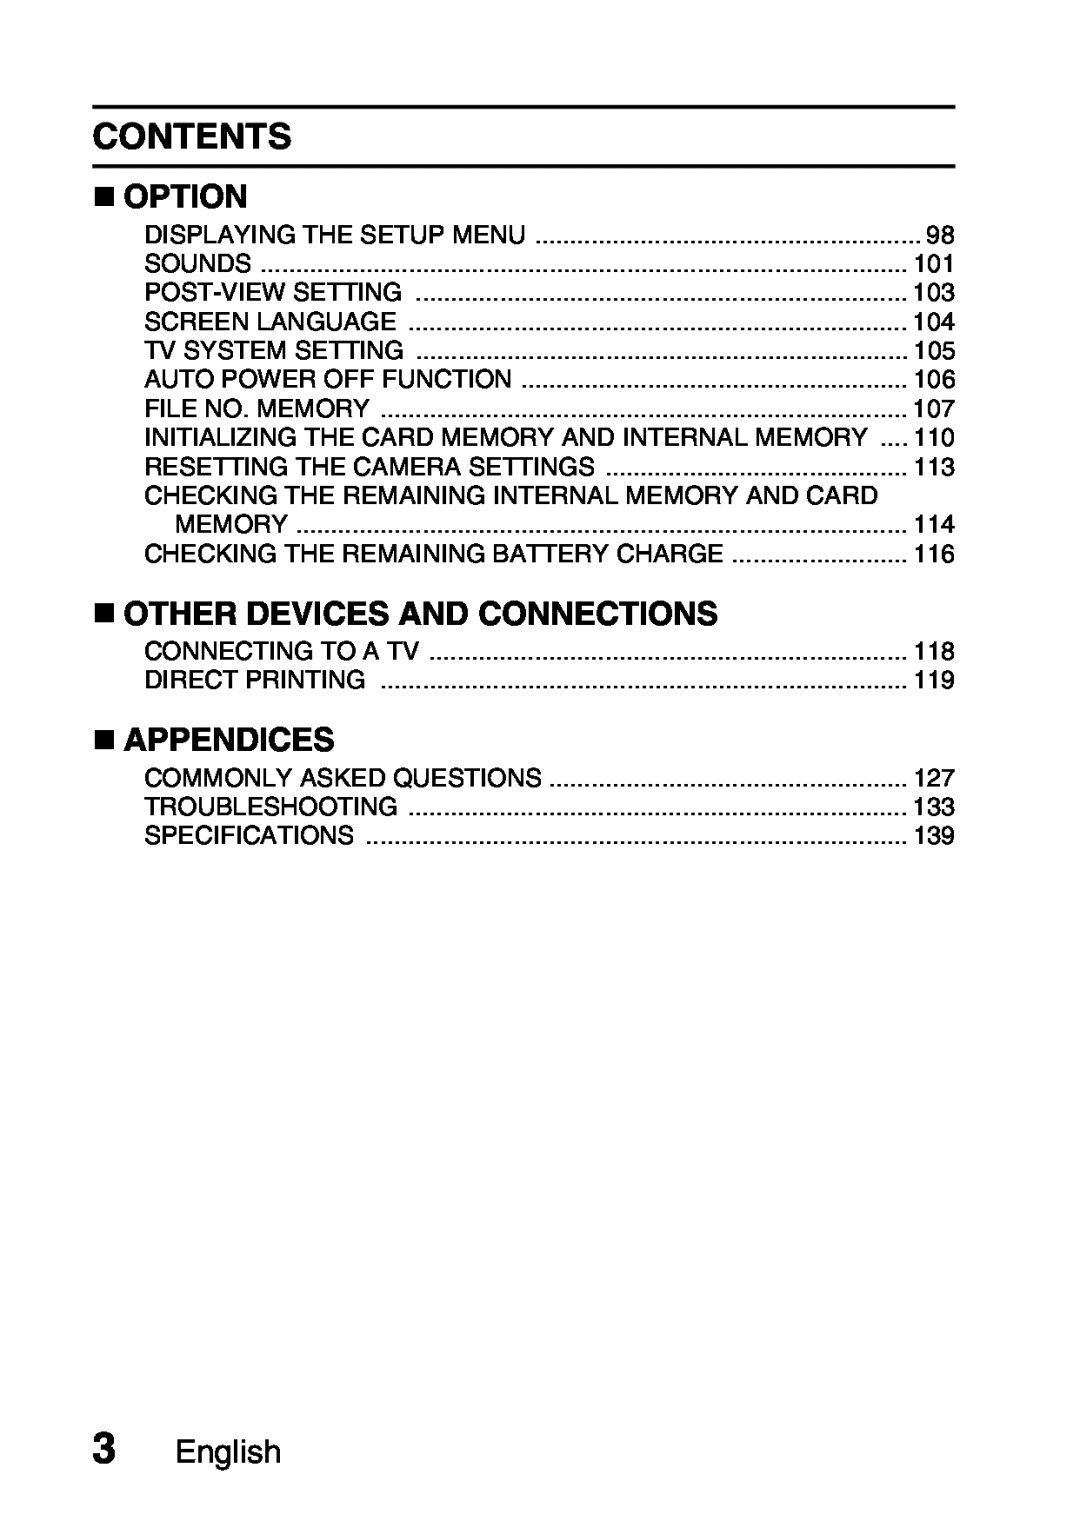 Samsung R50 instruction manual Contents, „ Option, „ Other Devices And Connections, „ Appendices, English 